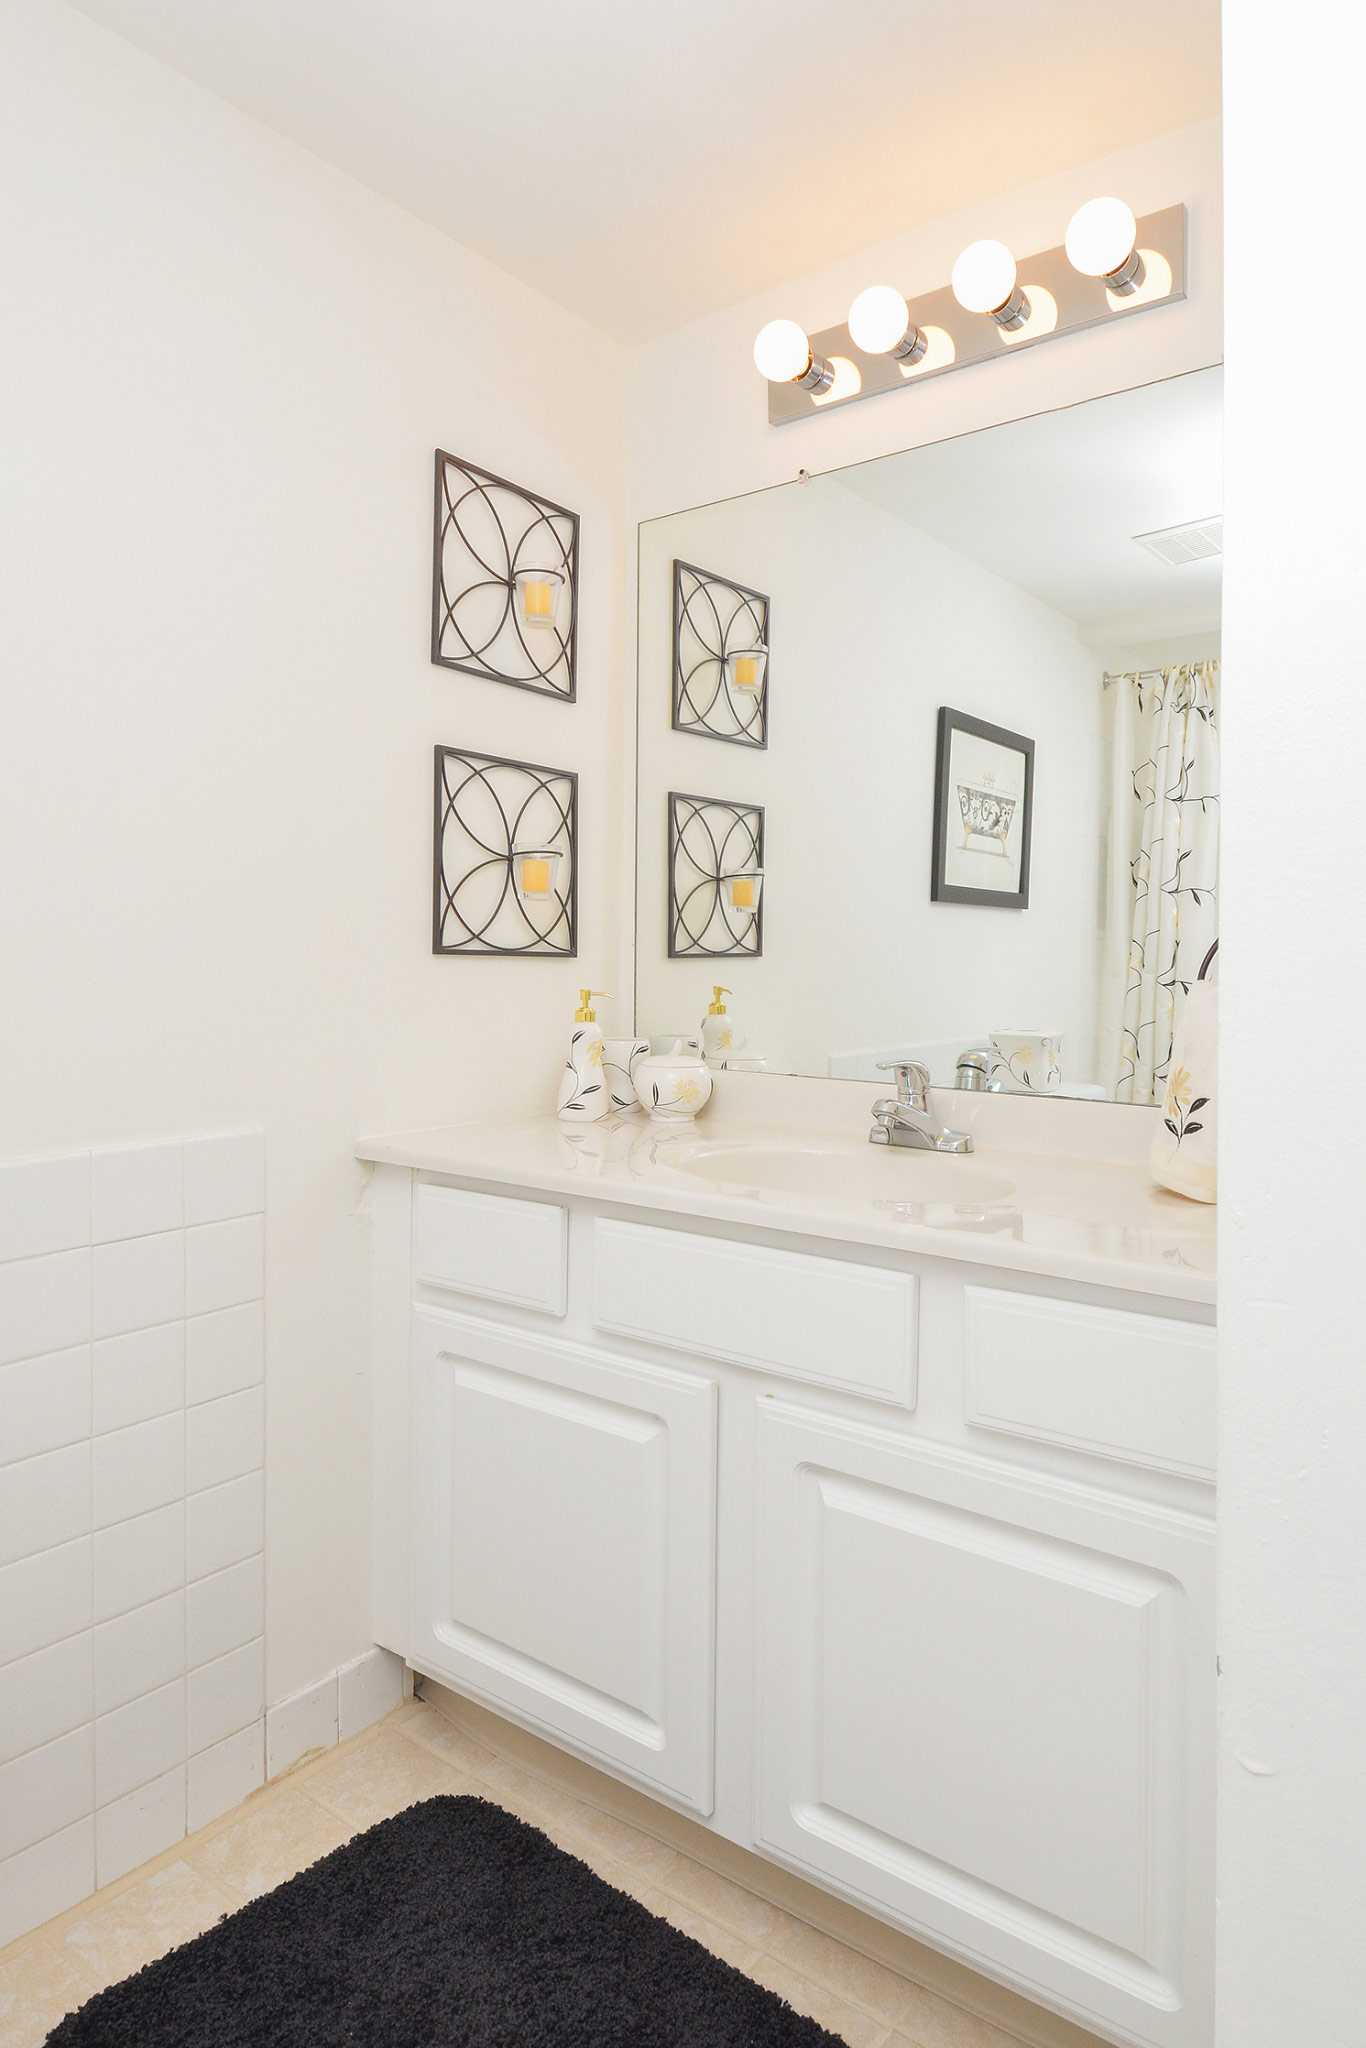 Bathroom area of an apartment is fitted with a single vanity, tiled flooring, and a high ceiling